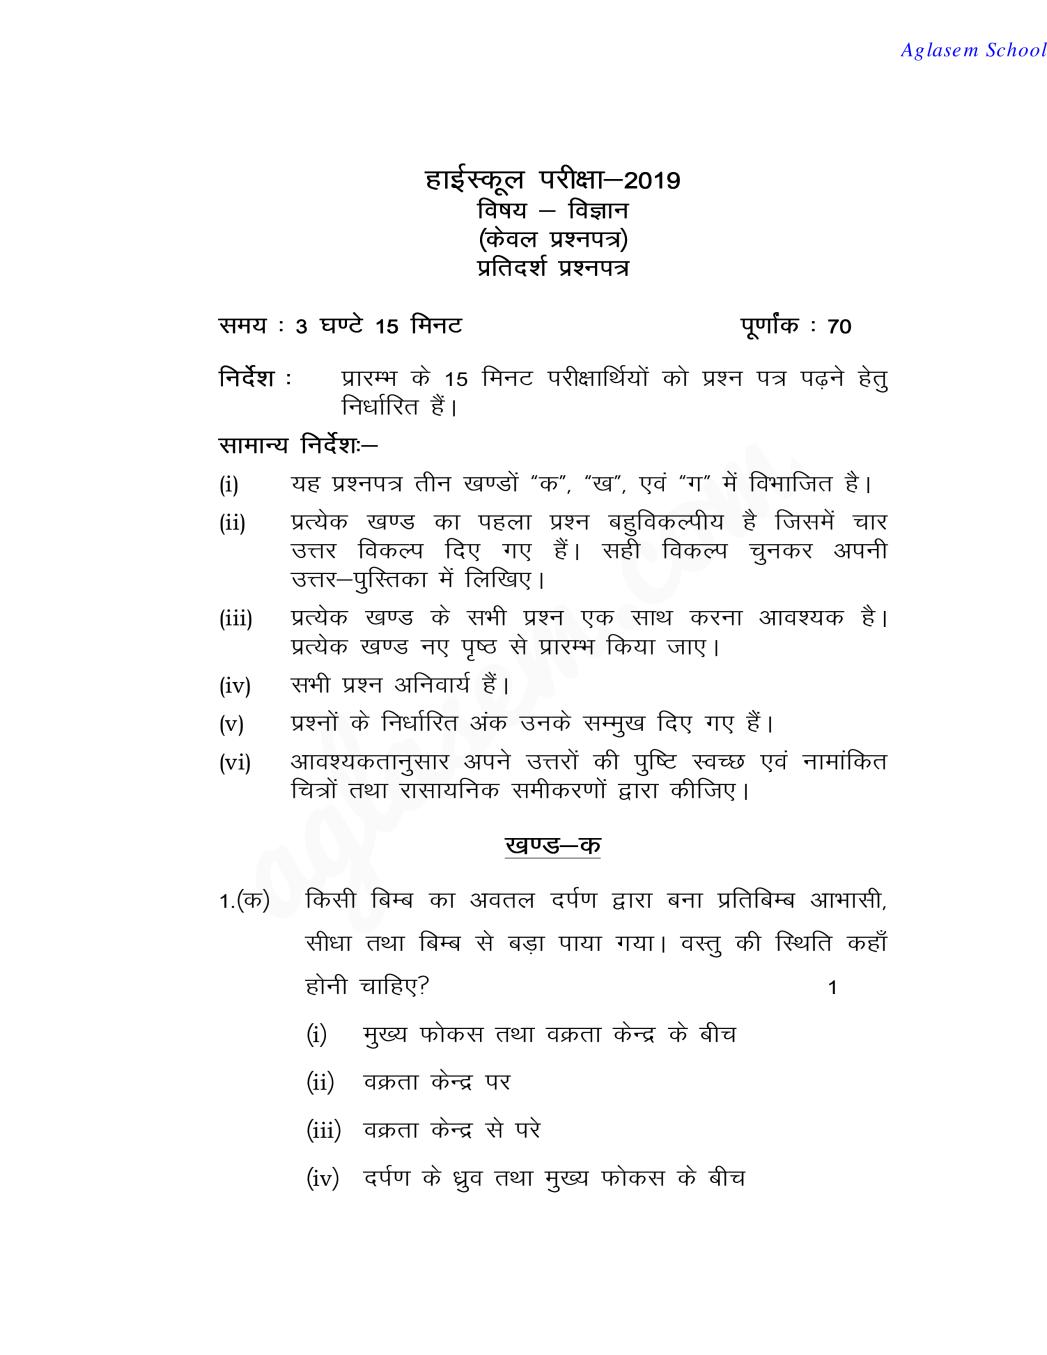 UP Board Class 10 Model Question Paper 2020 Science - Page 1